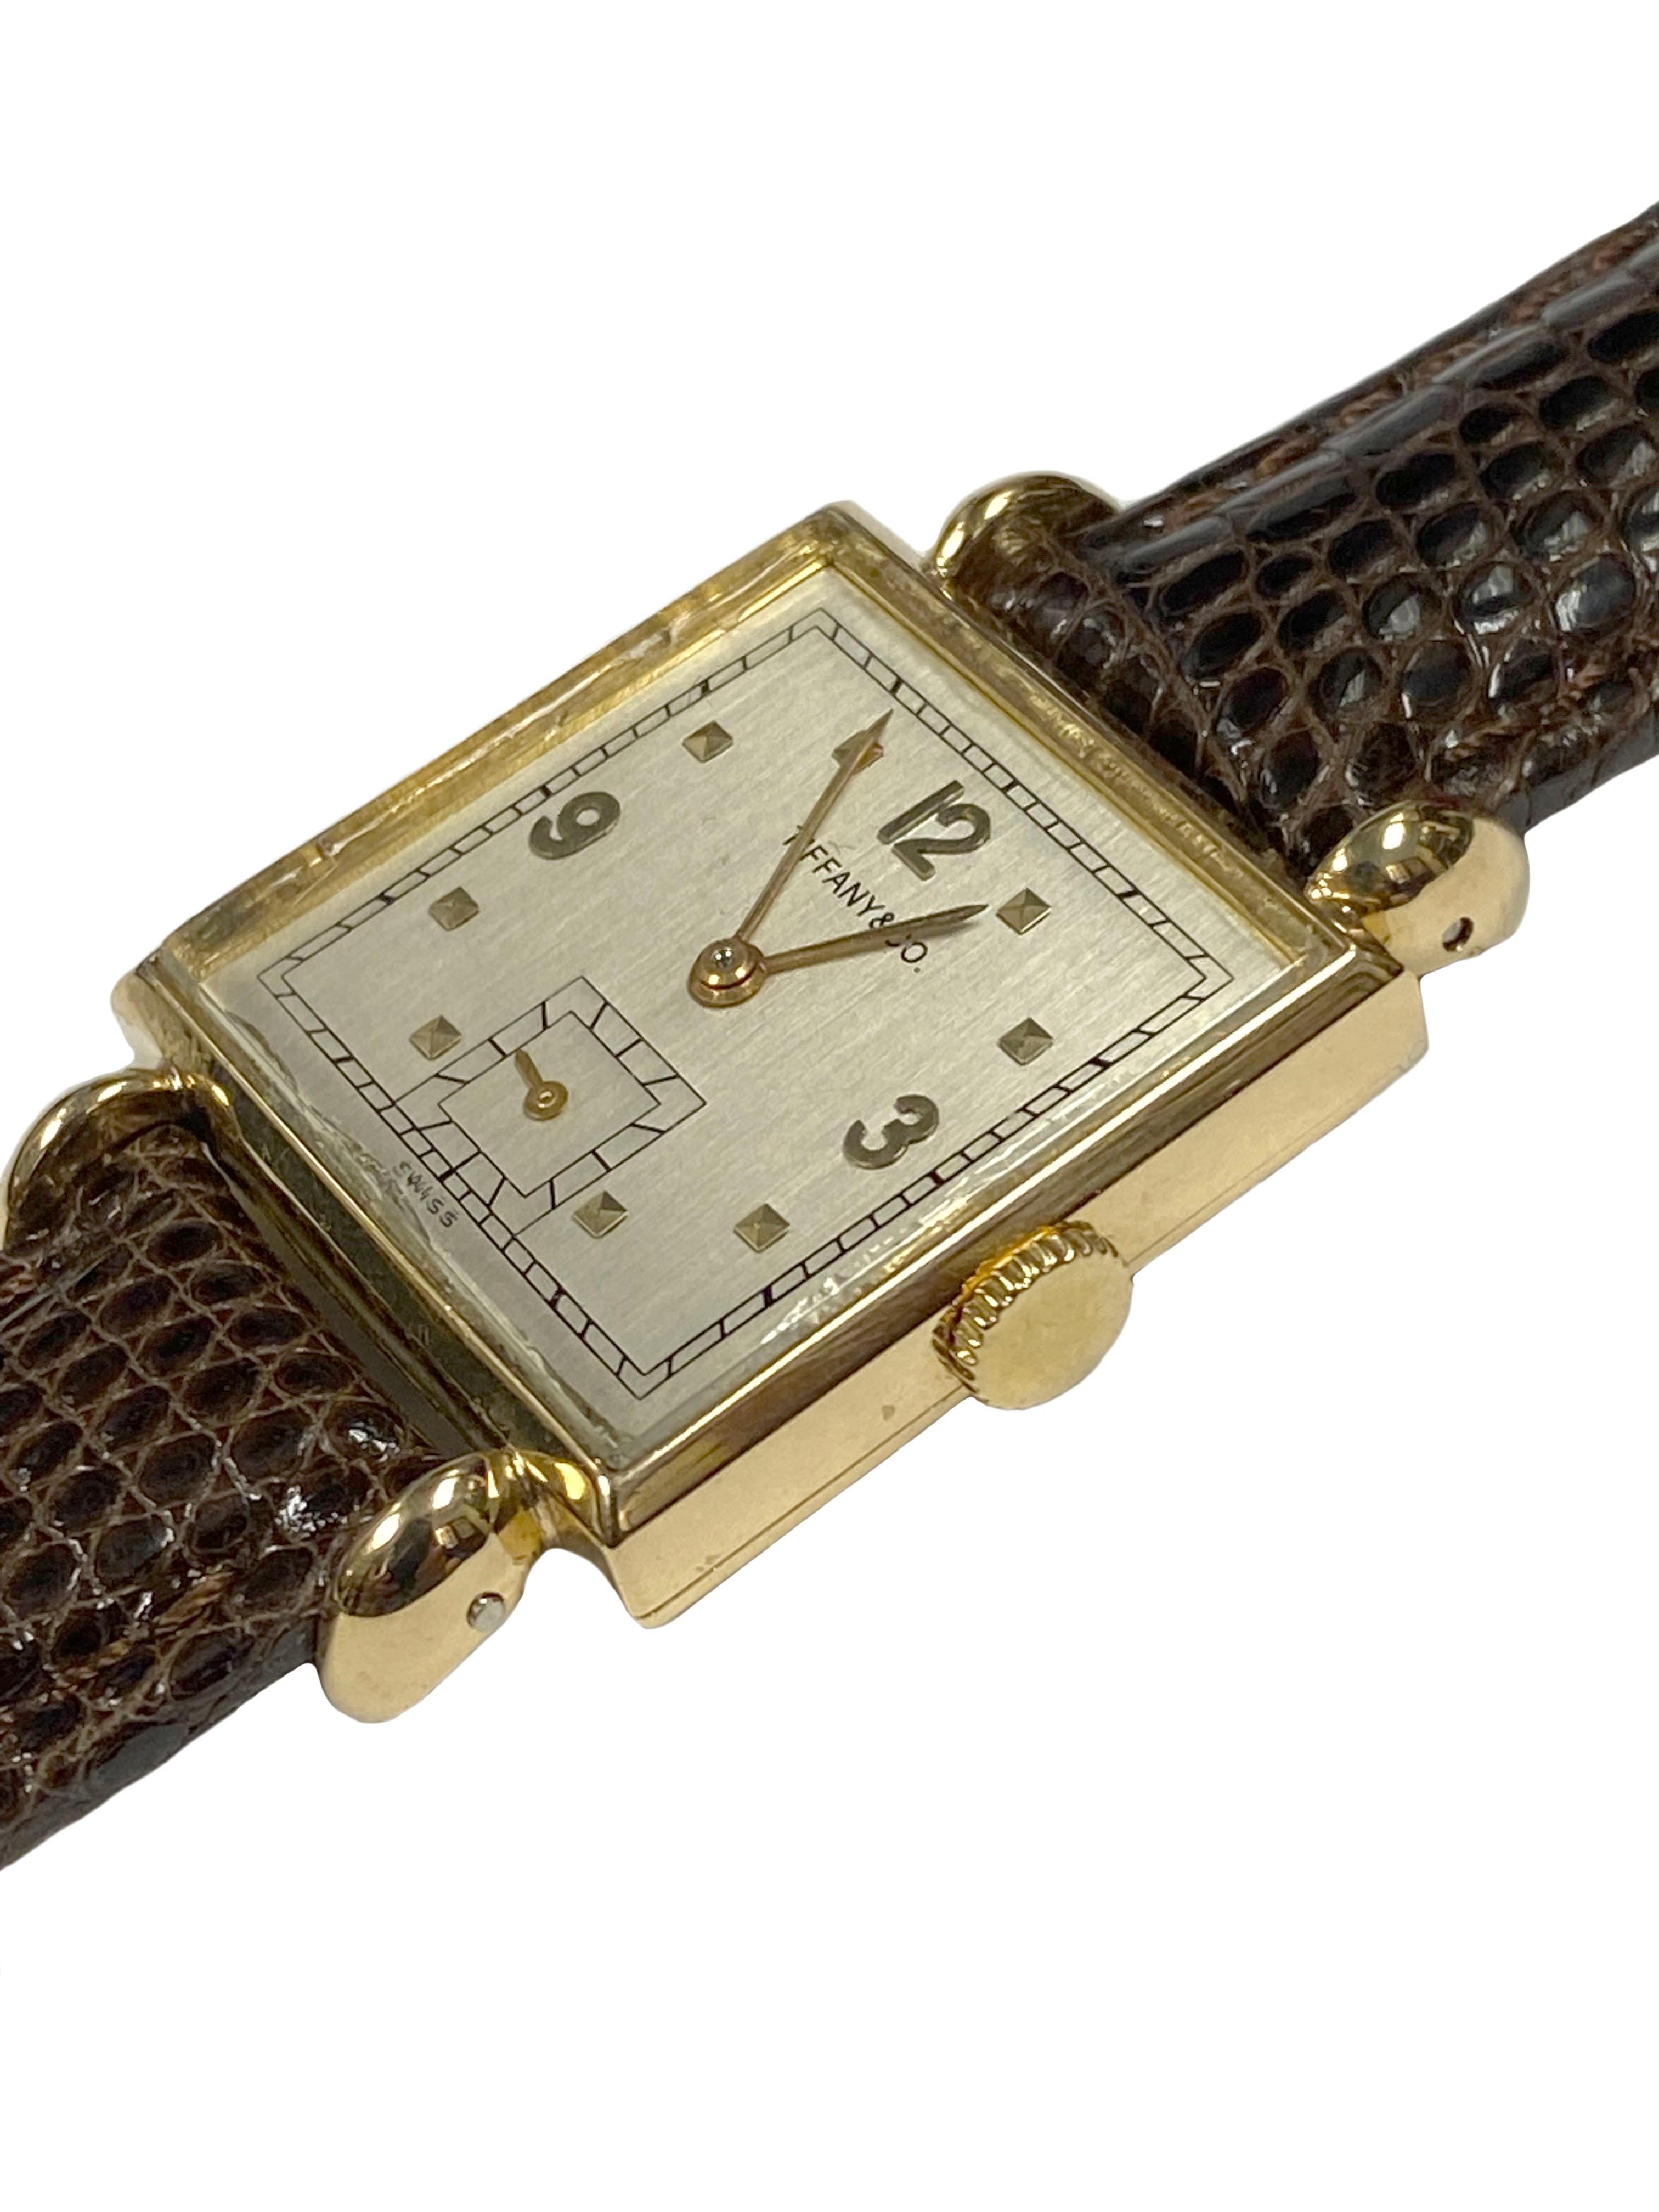 Circa 1930s C.H. Meylan for Tiffany & Company Wrist Watch, 26 X 26 M.M. Square 2 piece 18K yellow Gold Case with tear drop lugs. 17 Jewel C.H. Meylan Movement, Silver Satin dial with raised Gold markers. New Brown Padded, Stitched. Lizard strap.